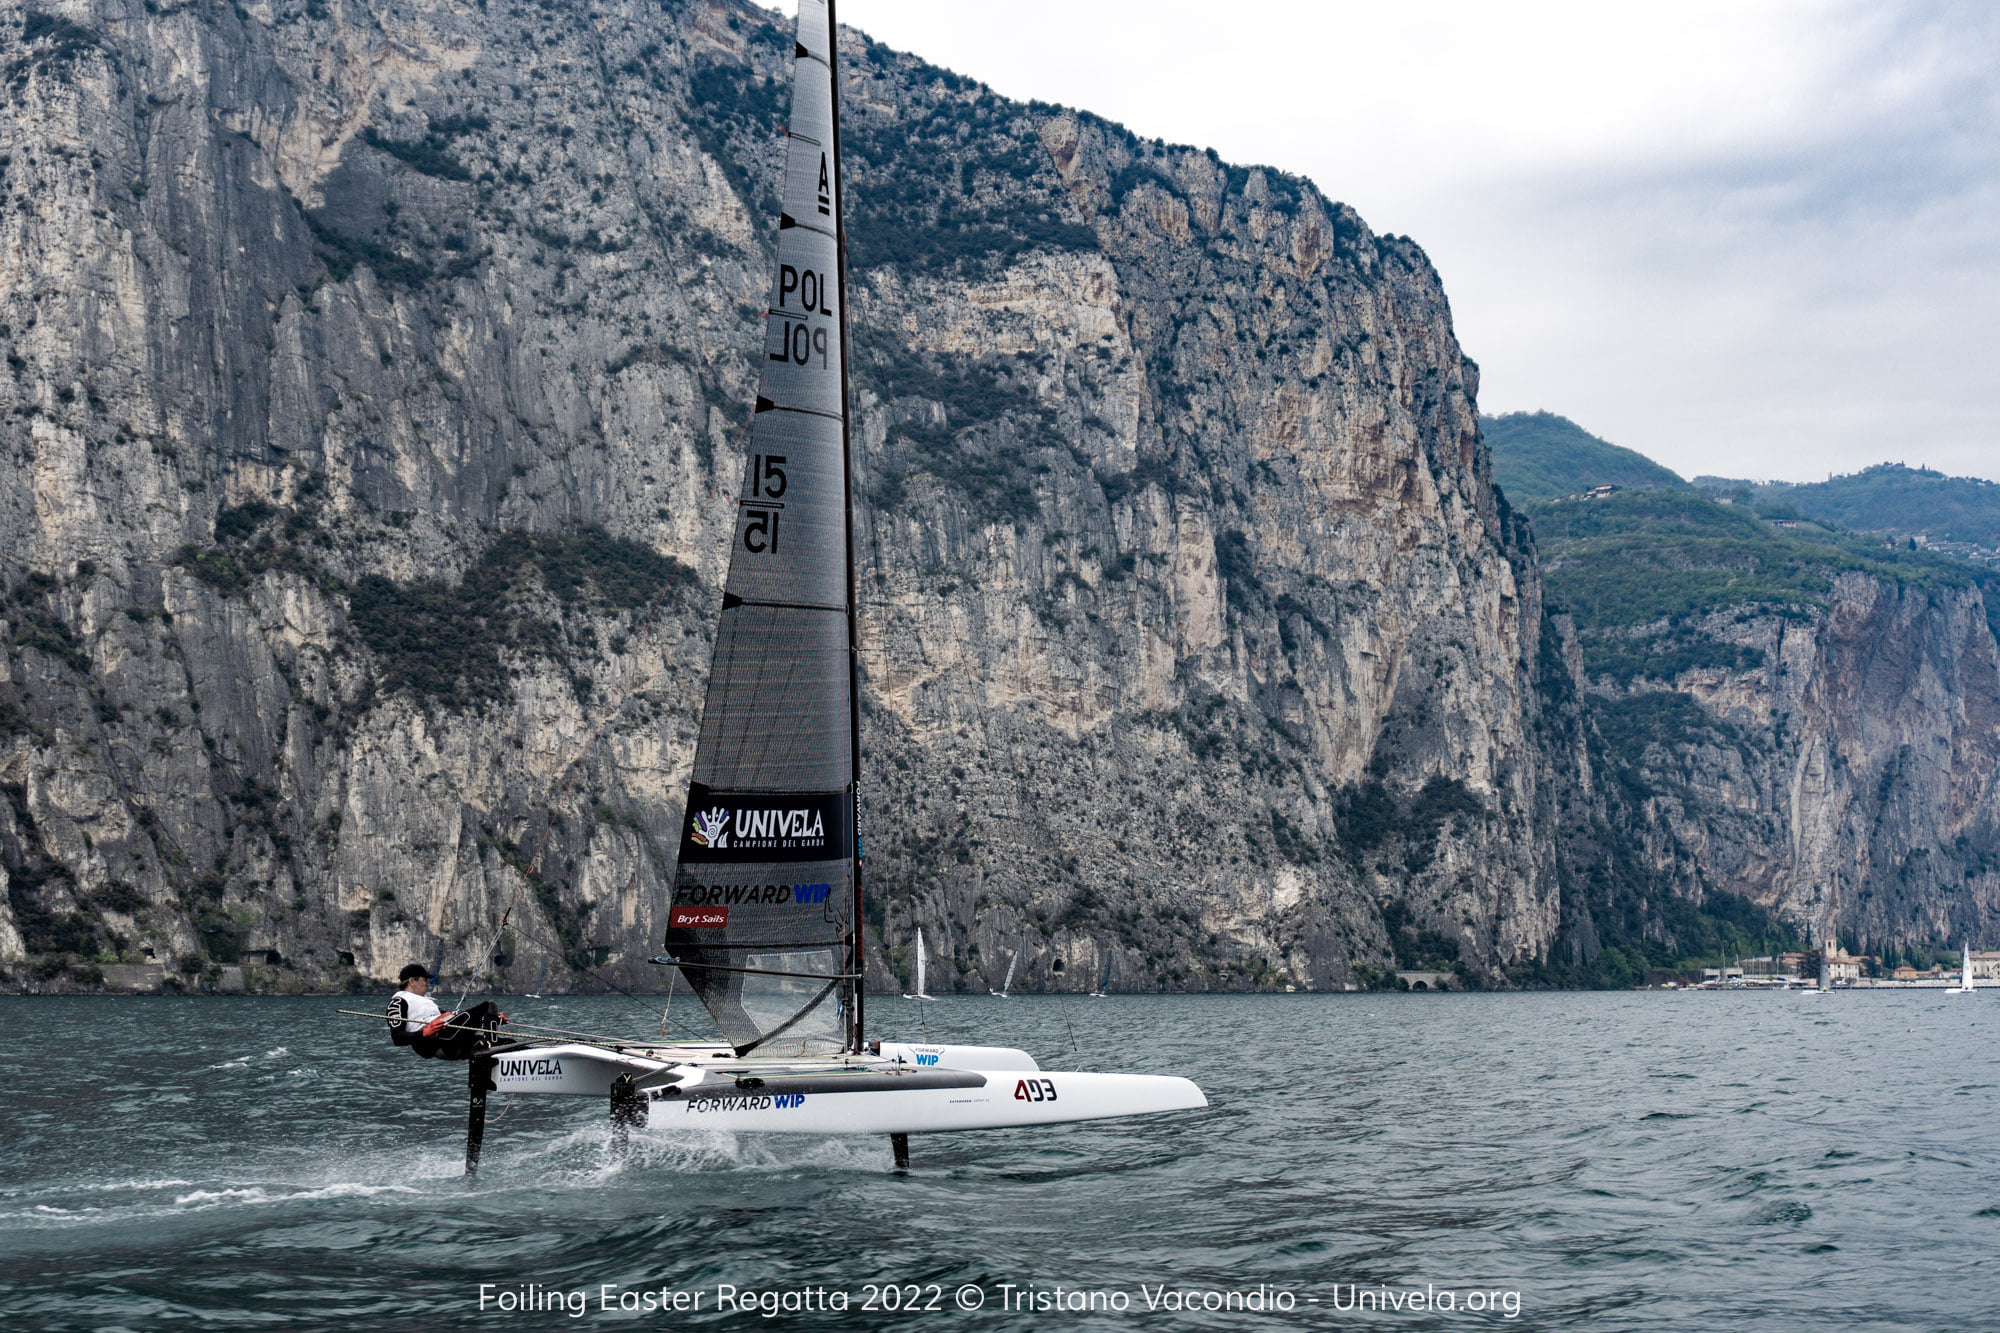  ACat  Foiling Easter  Campione ITA  Final results